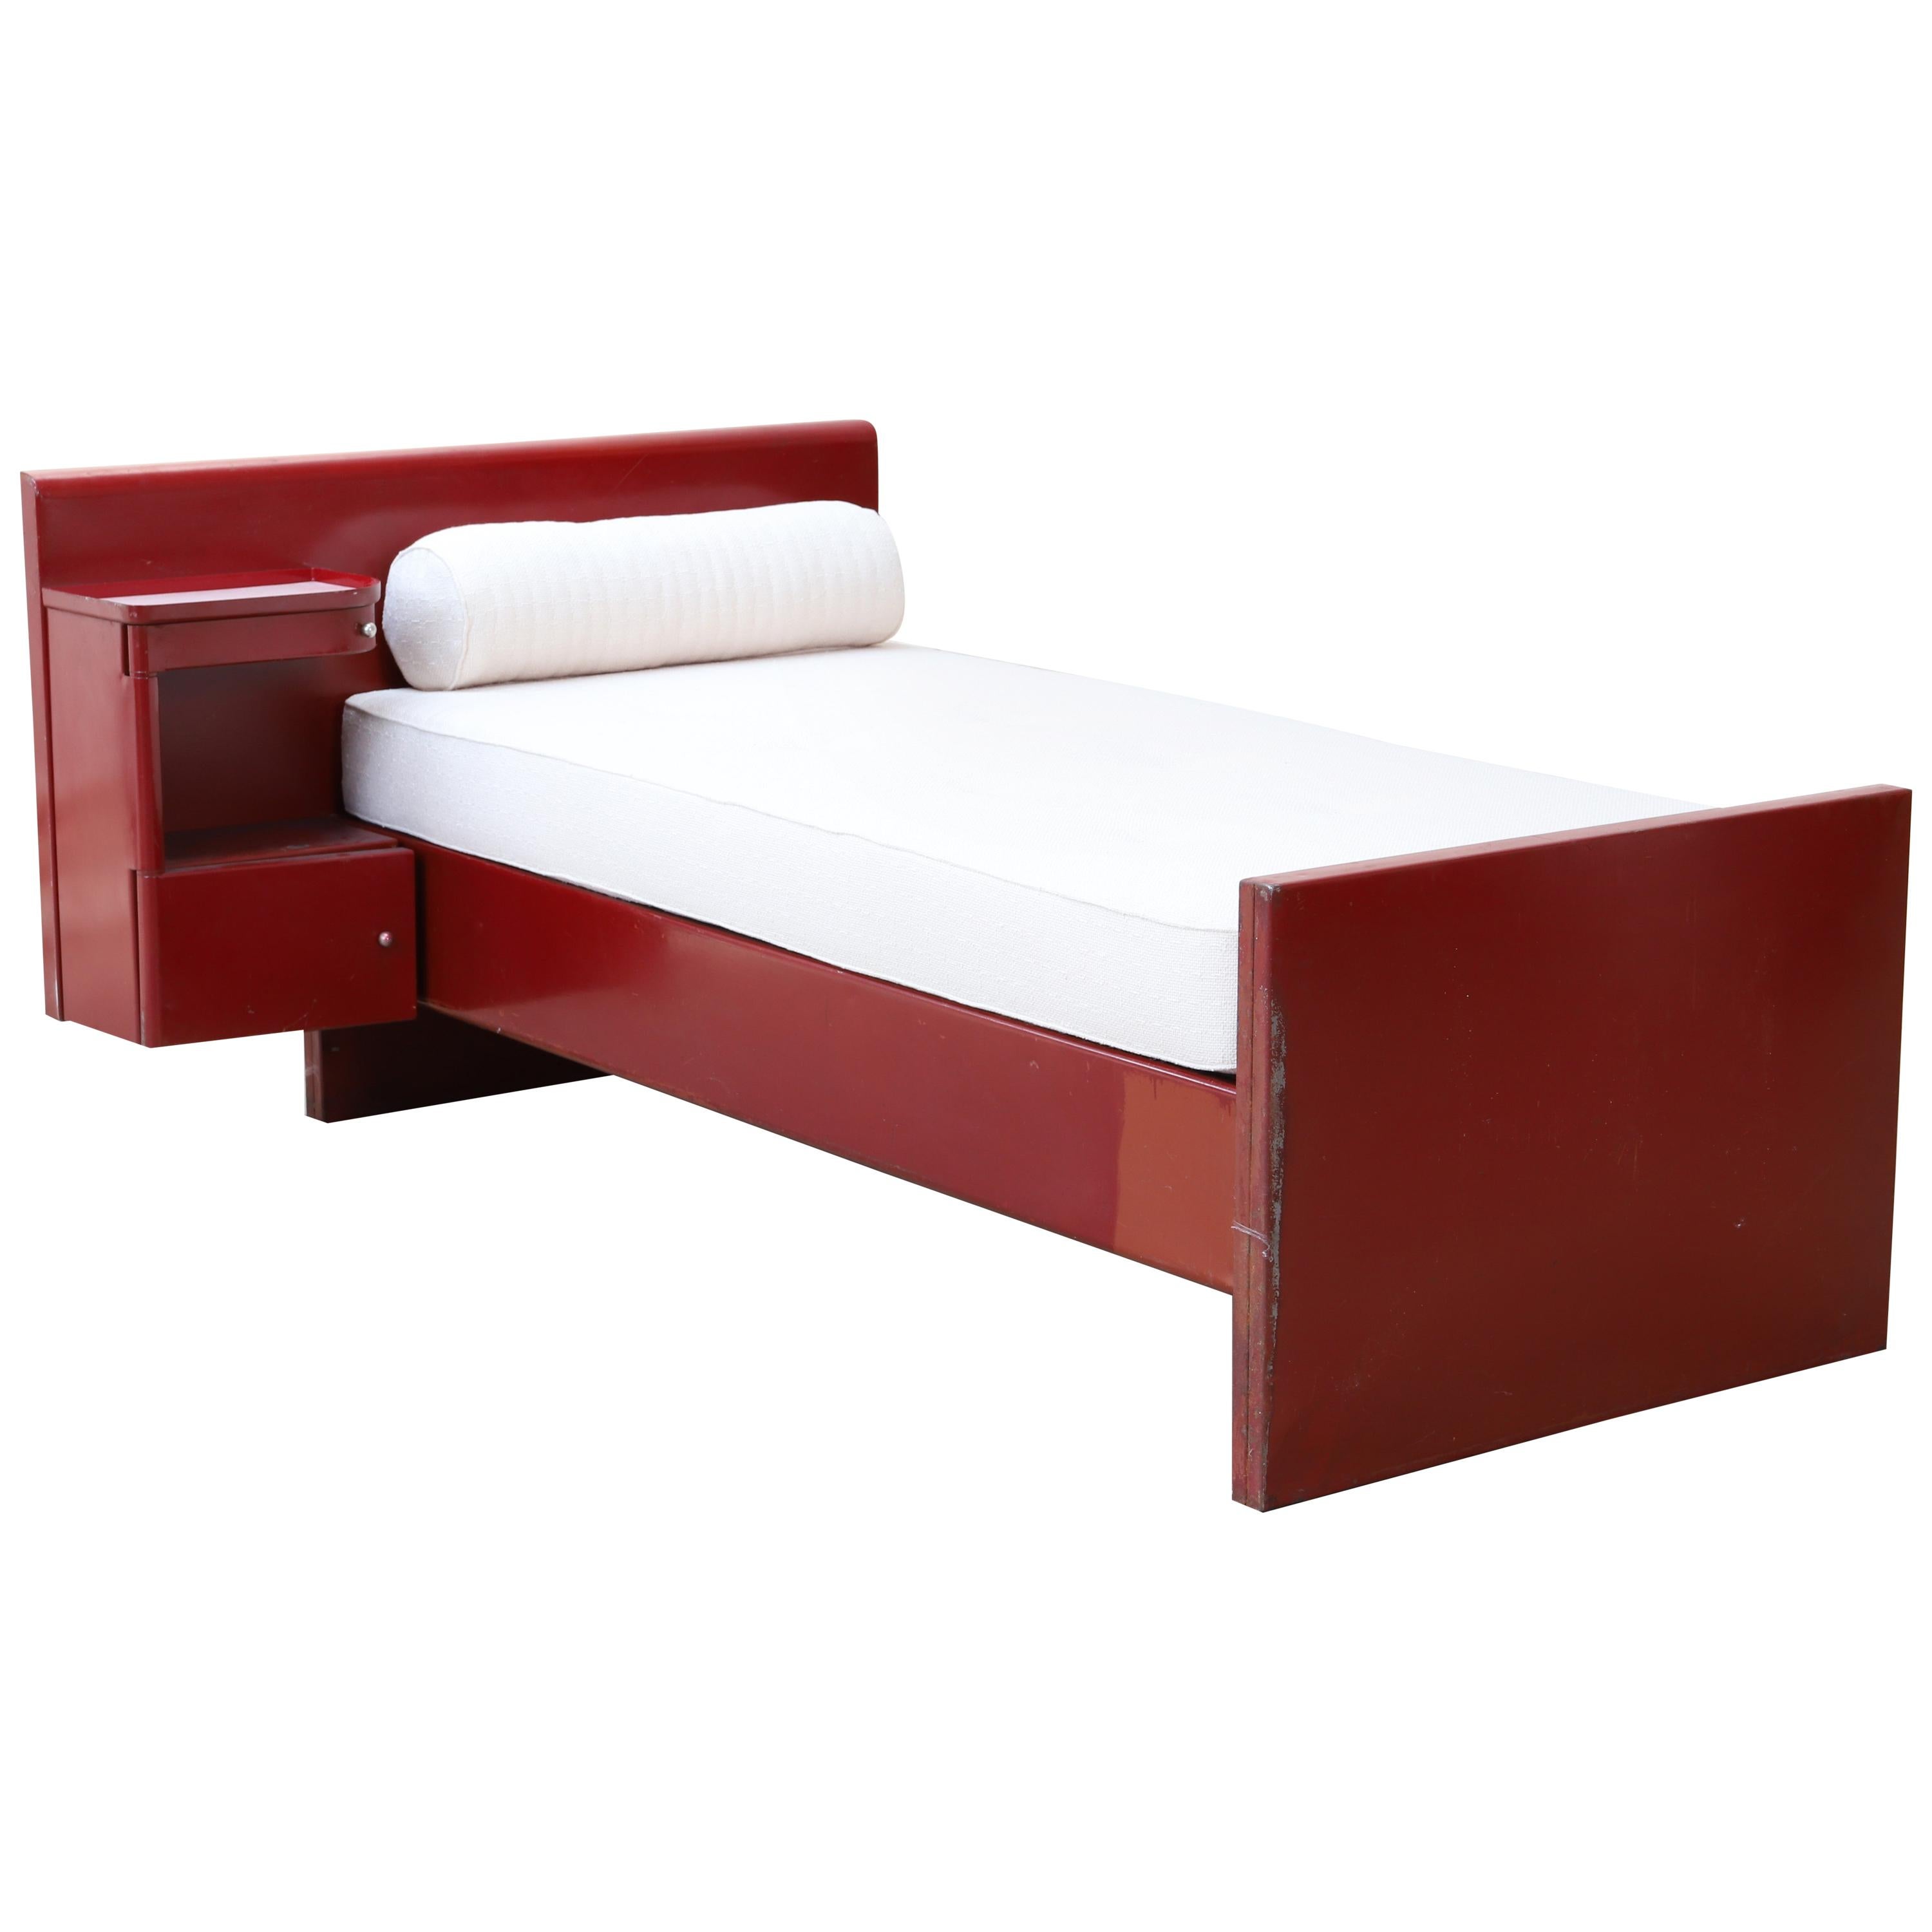 What is a bed desk?